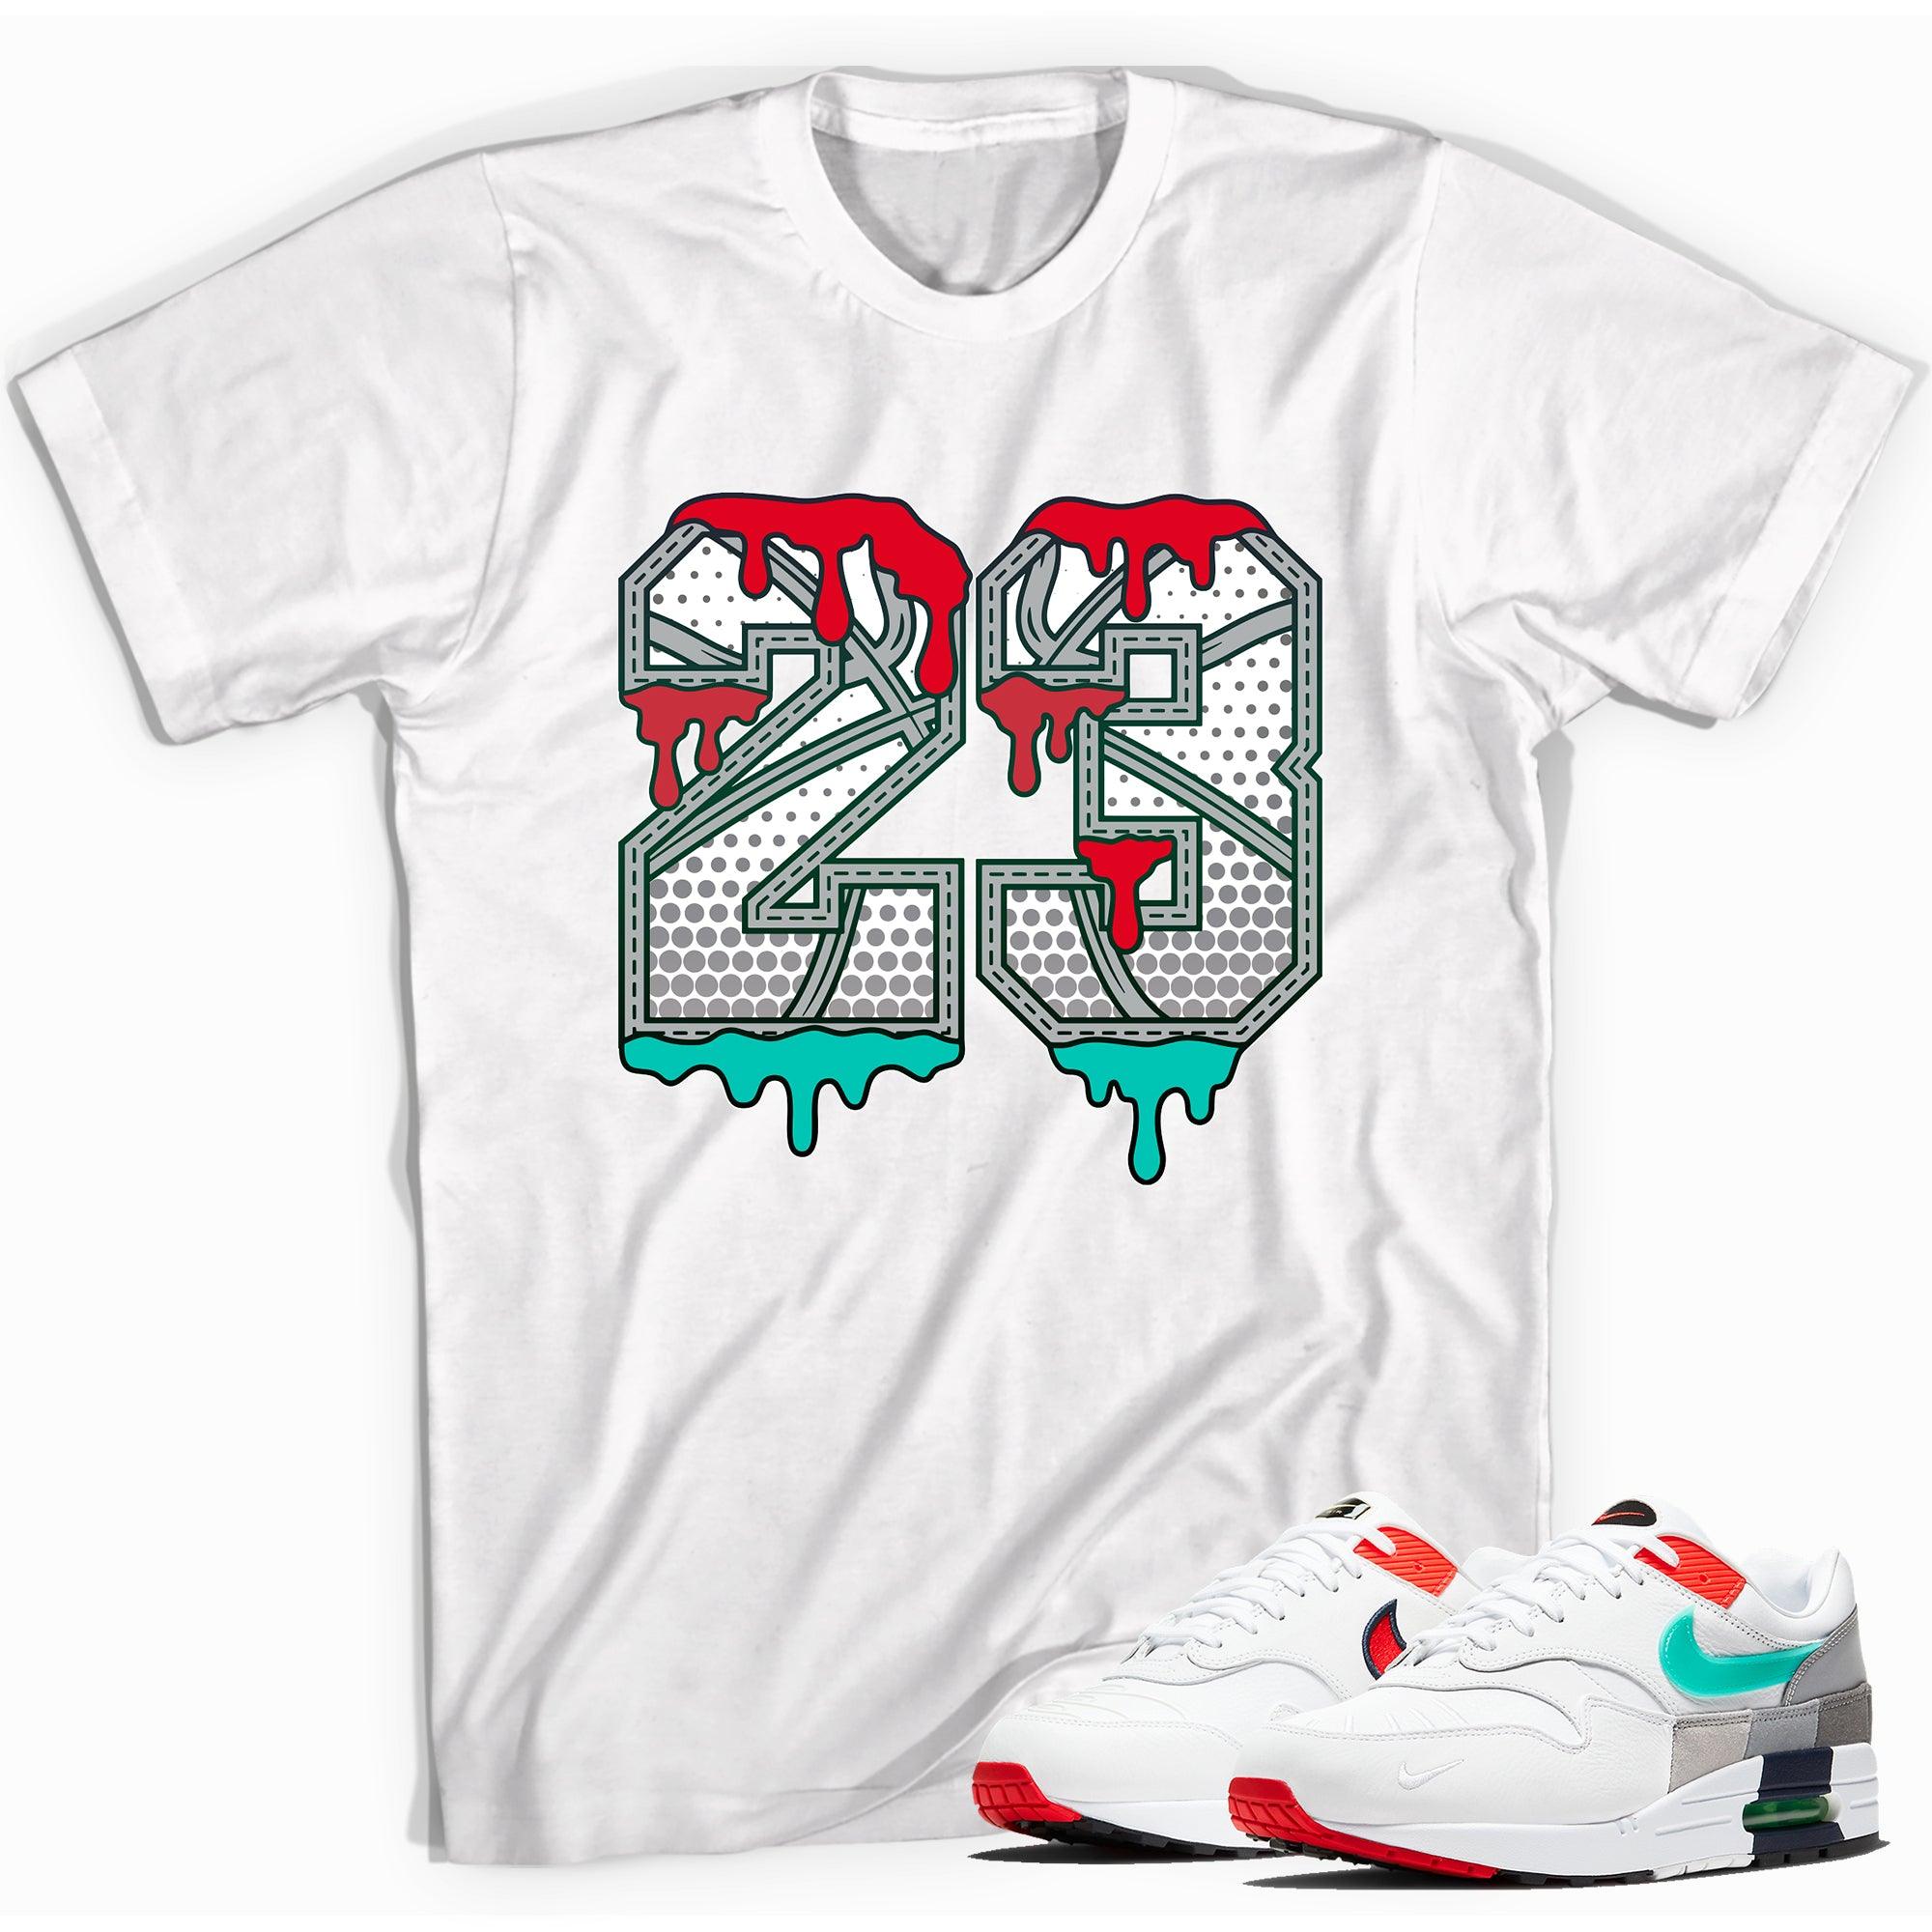 Number 23 Ball Shirt Nike Air Max 1 Evolution Of Icons photo